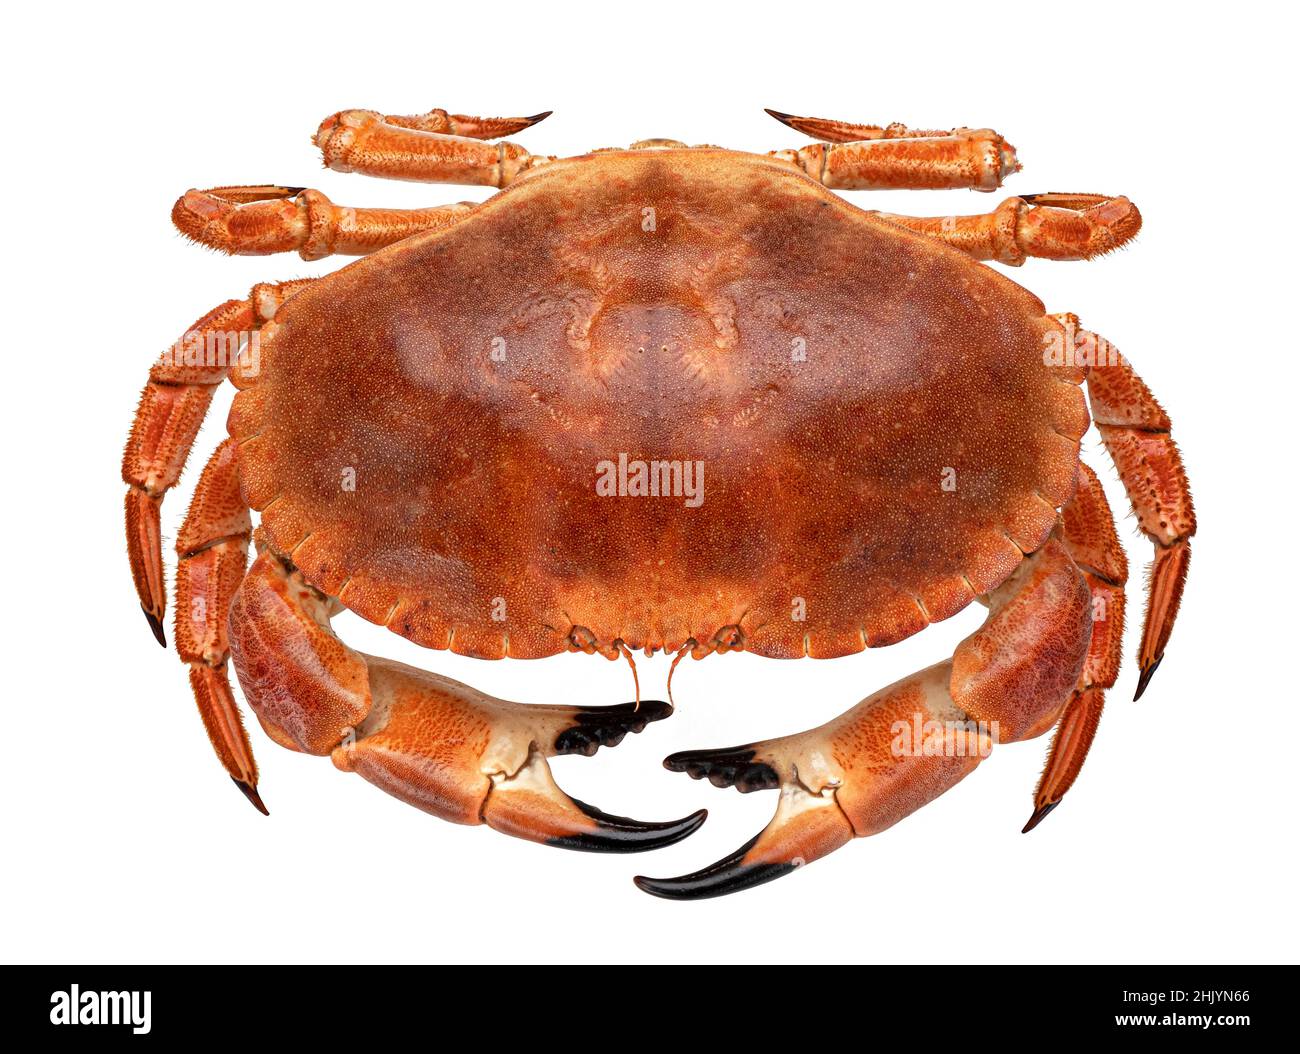 Cooked crab isolated on white background Stock Photo